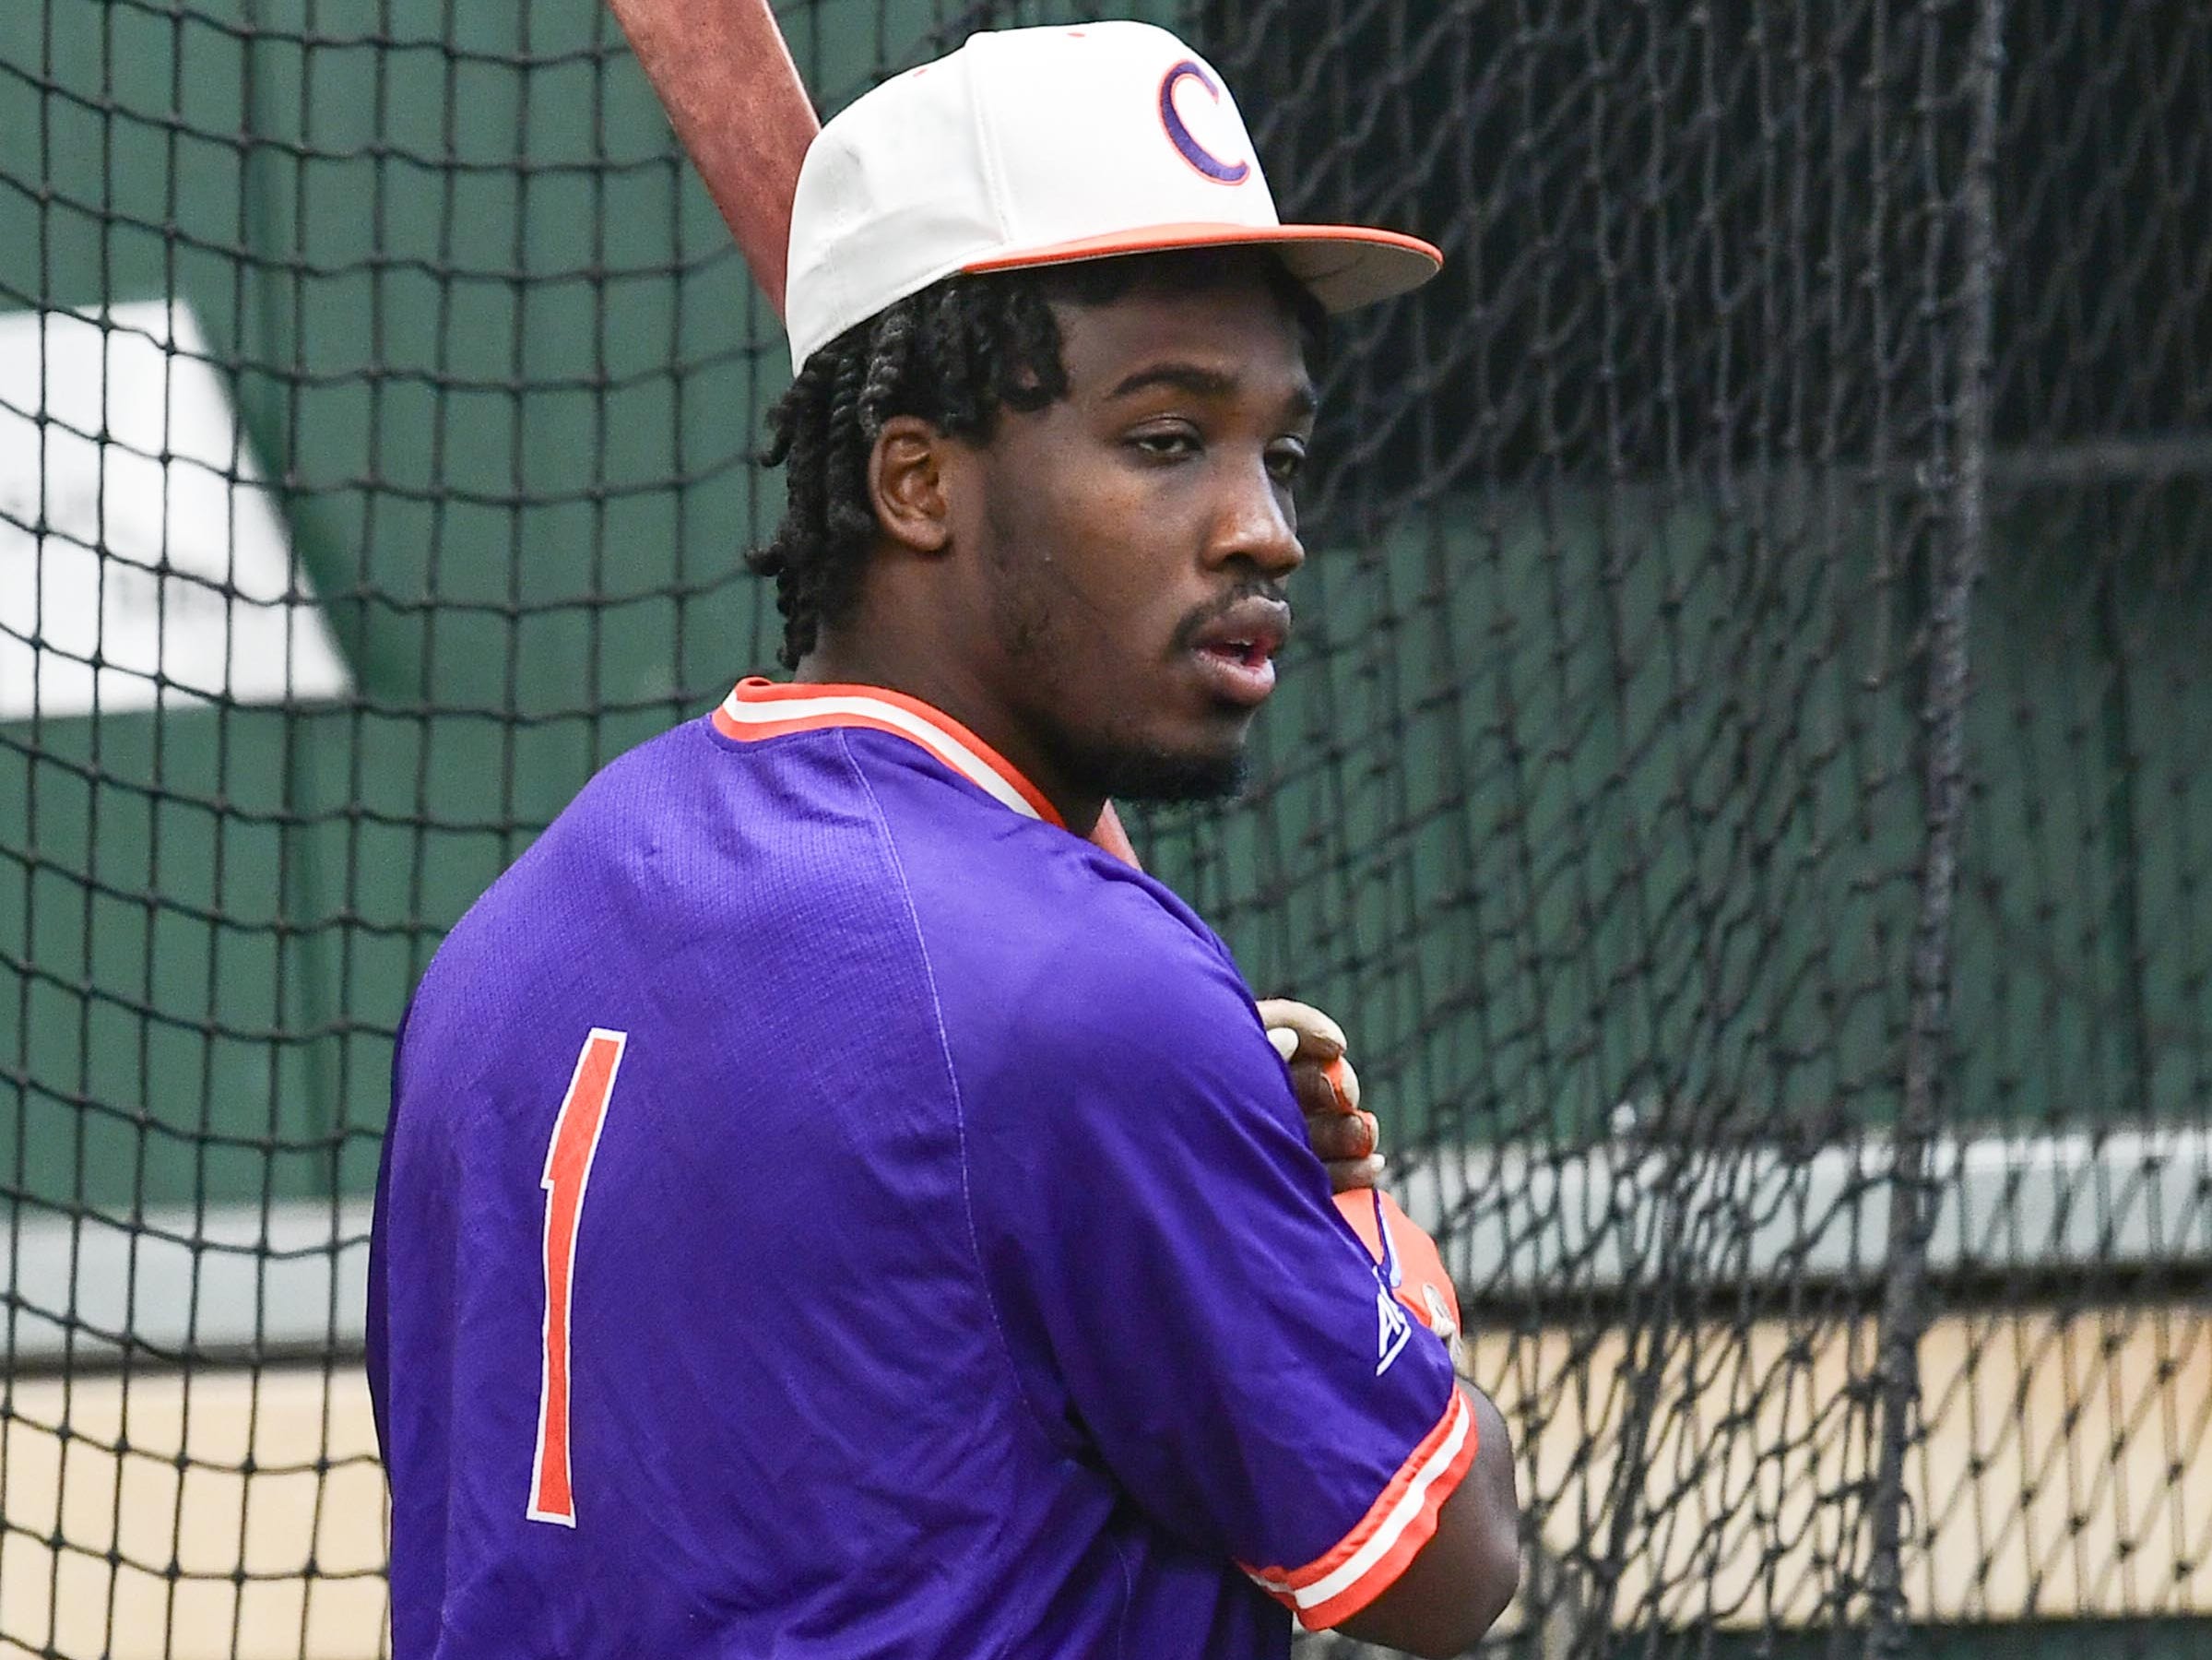 Clemson sophomore Kier Meredith(1) during batting practice at the first official team Spring practice at Doug Kingsmore Stadium in Clemson Friday, January 24, 2020.